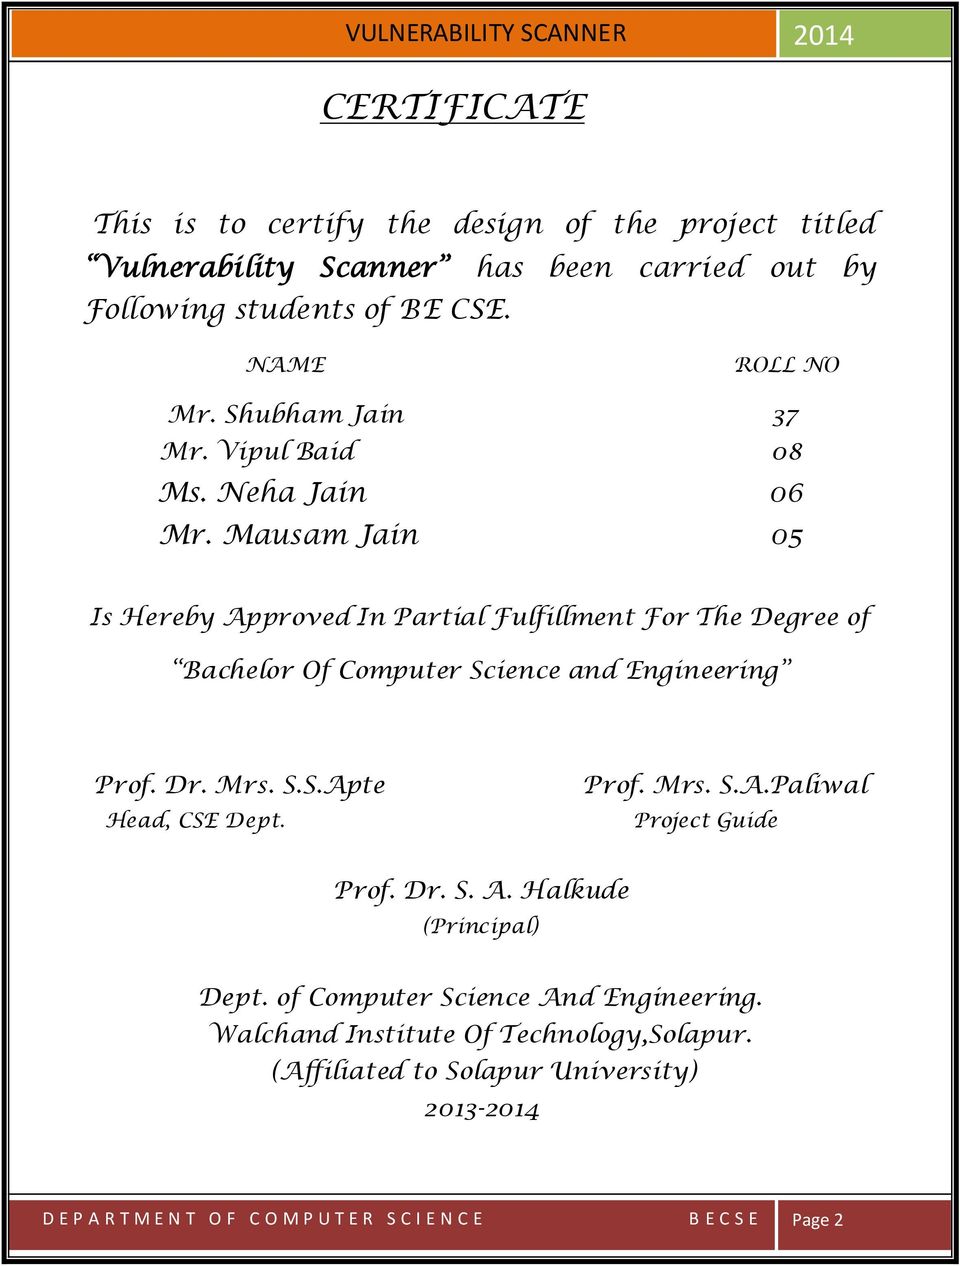 Mausam Jain 05 Is Hereby Approved In Partial Fulfillment For The Degree of Bachelor Of Computer Science and Engineering Prof. Dr. Mrs. S.S.Apte Head, CSE Dept.